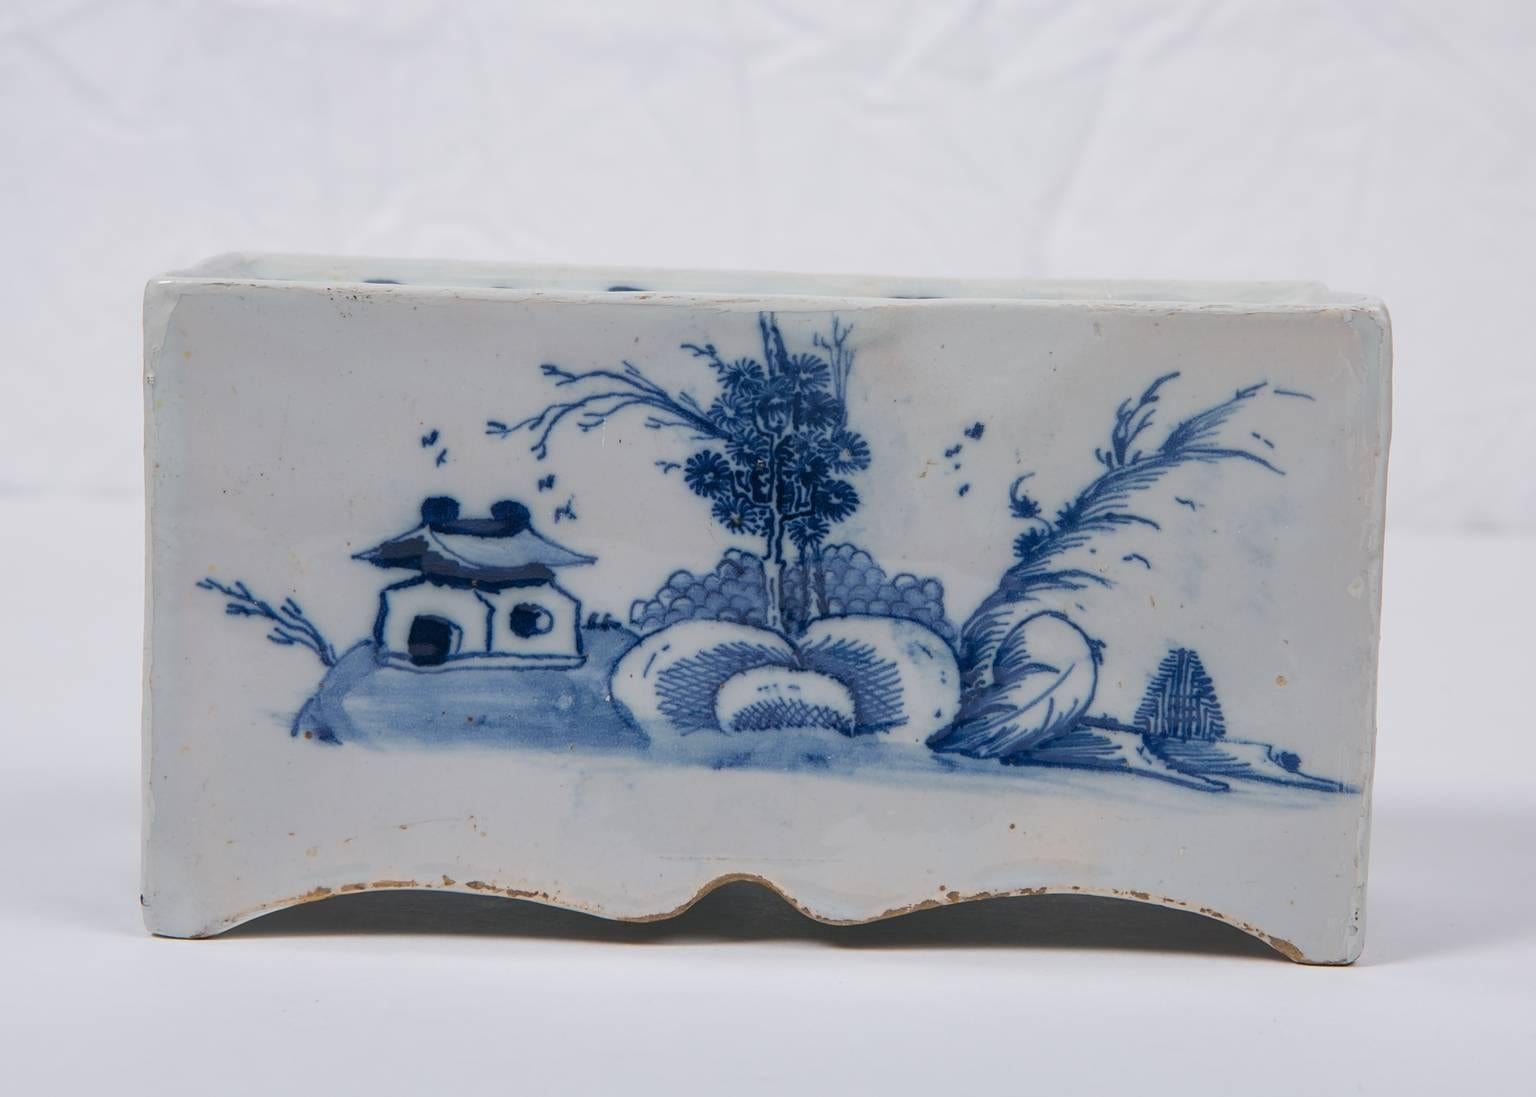 A Blue and White Delft Flower Brick made in Bristol, England circa 1750.  Flower bricks were most likely made to hold dried flowers as it seems it would have been too difficult to clean the inside of any flower debris. 
Each long side of the brick